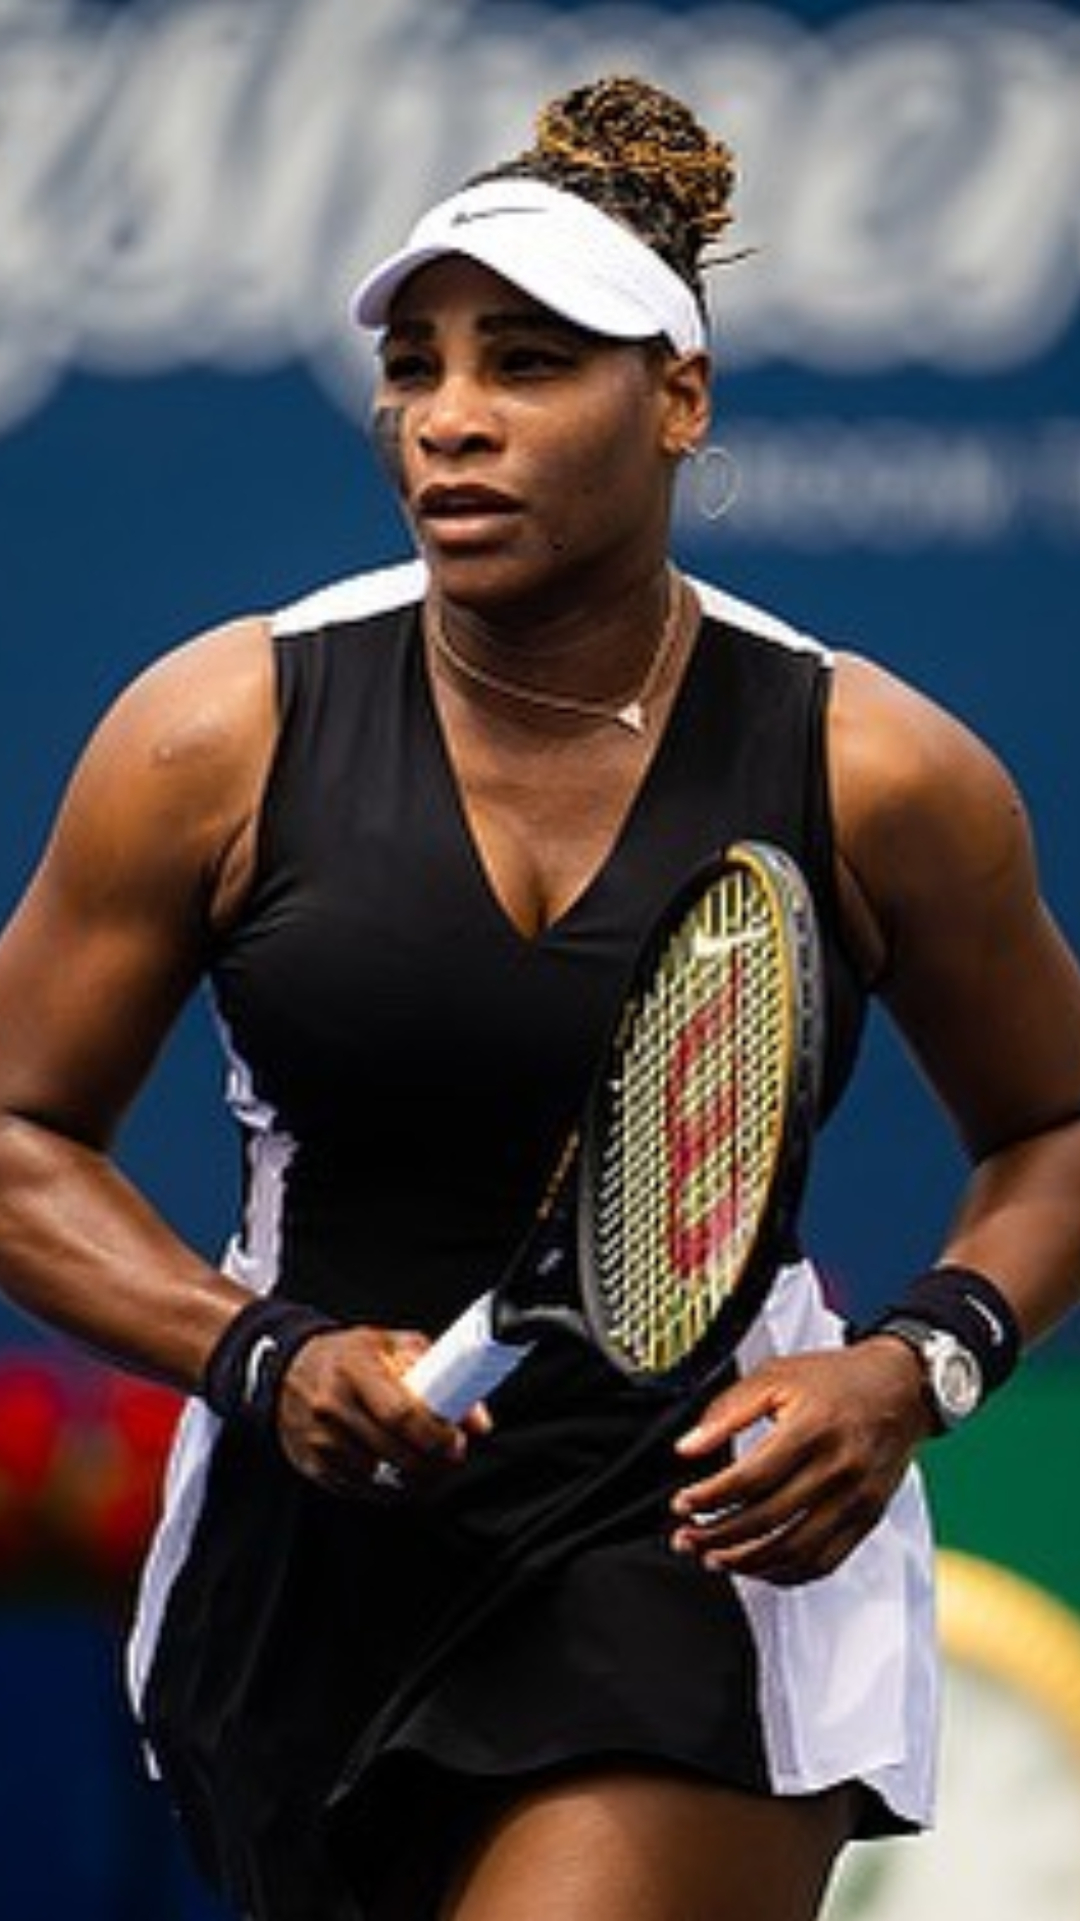 US Open Here's list of top 5 female tennis players with most titles